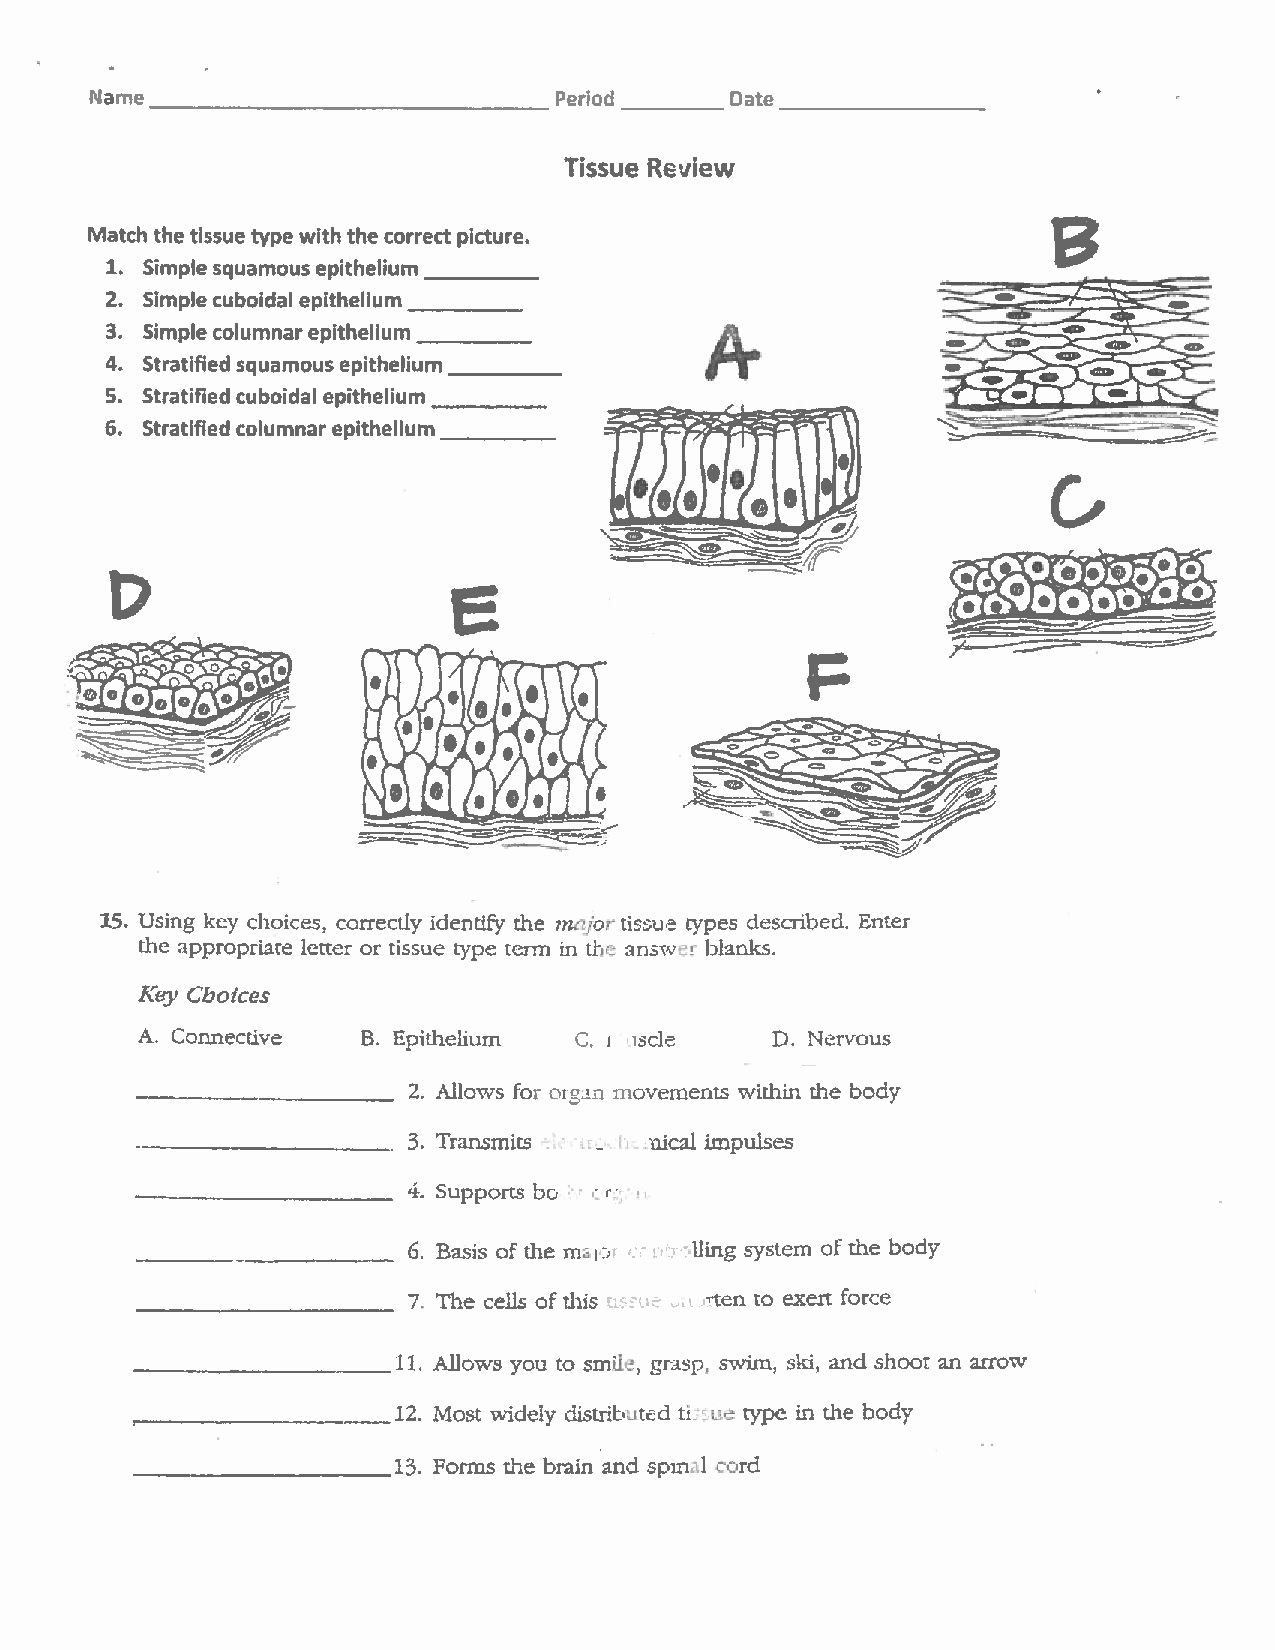 Types Of Tissues Worksheet Awesome Types Of Epithelial Tissue and Its Idendification Docsity